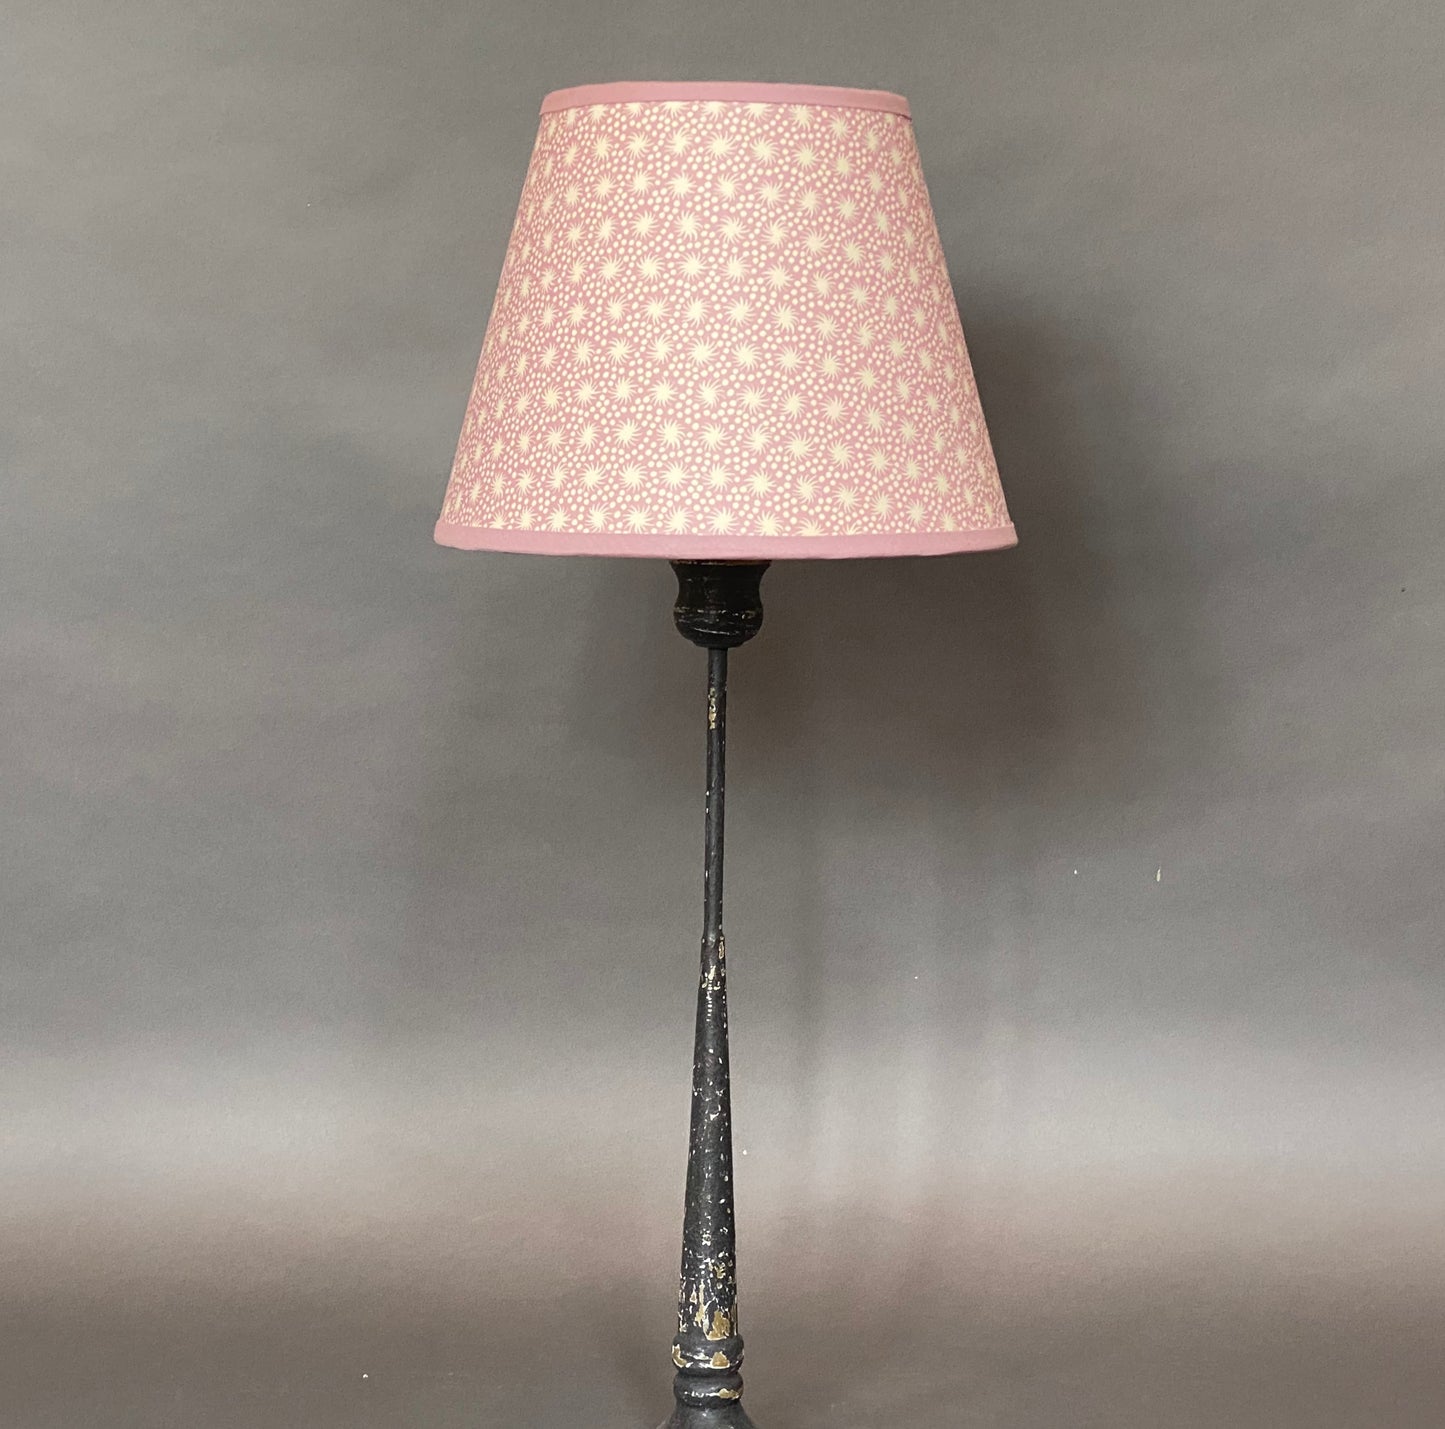 Pink Paper Lampshade shown on a tall candlestick lamp base on a grey background